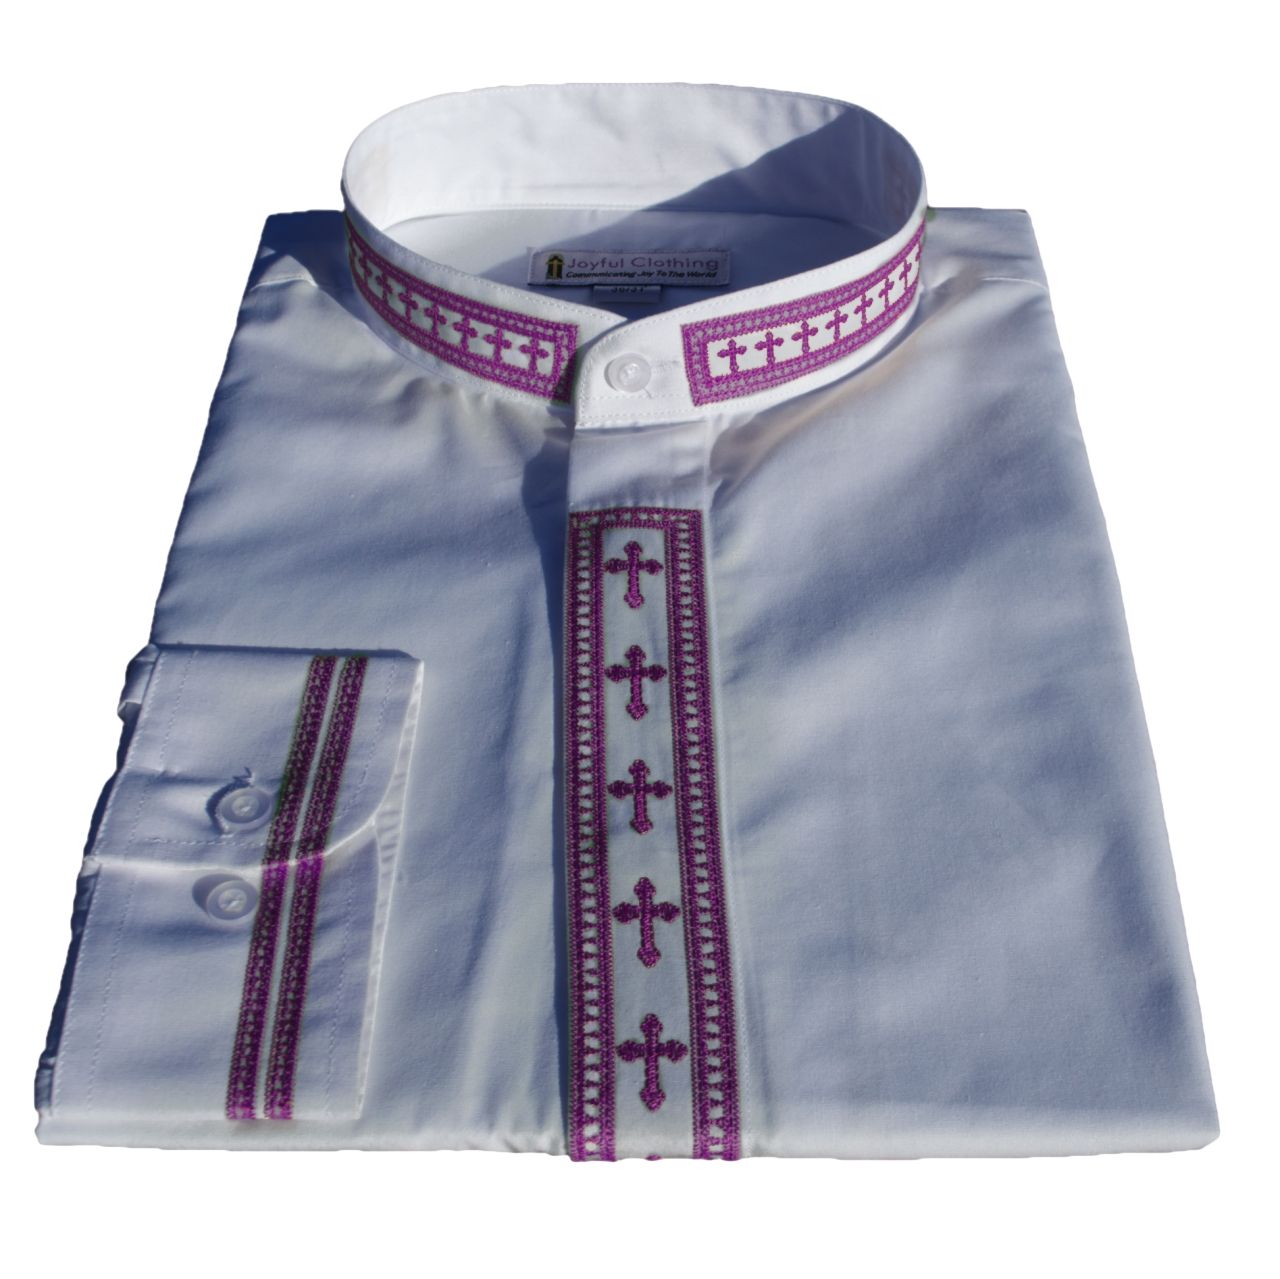 317. Men's Long-Sleeve Clergy Shirt With Fine Embroidery - White/Purple